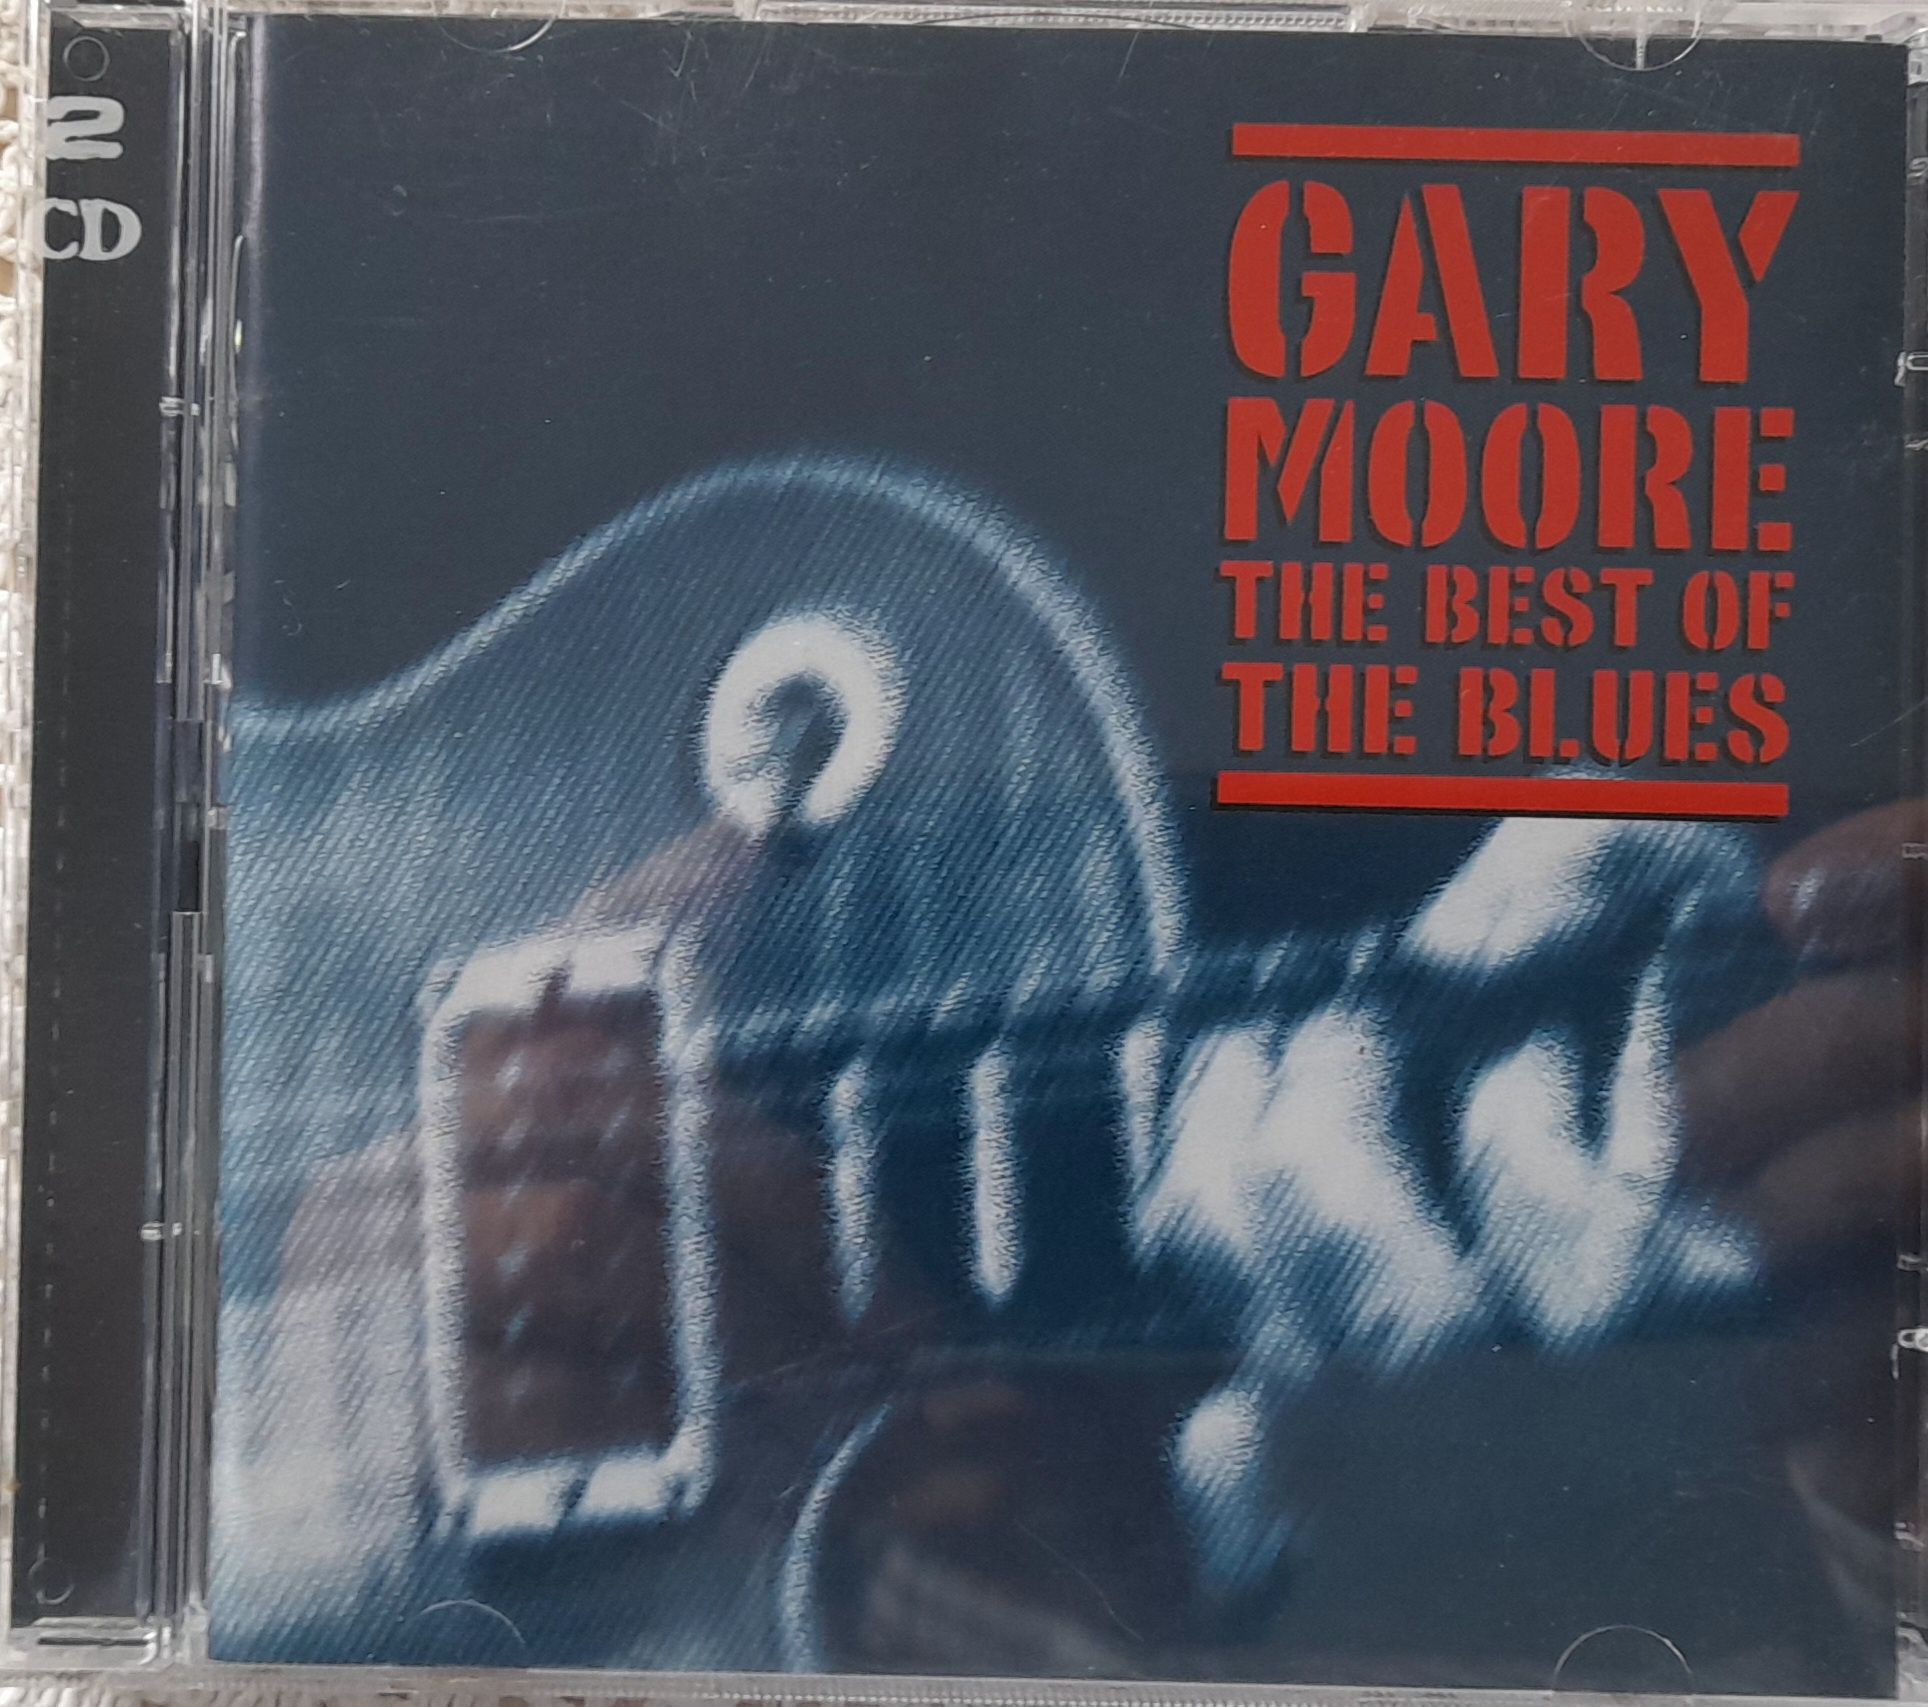 CD Gary Moore - The best of the blues CD duplo